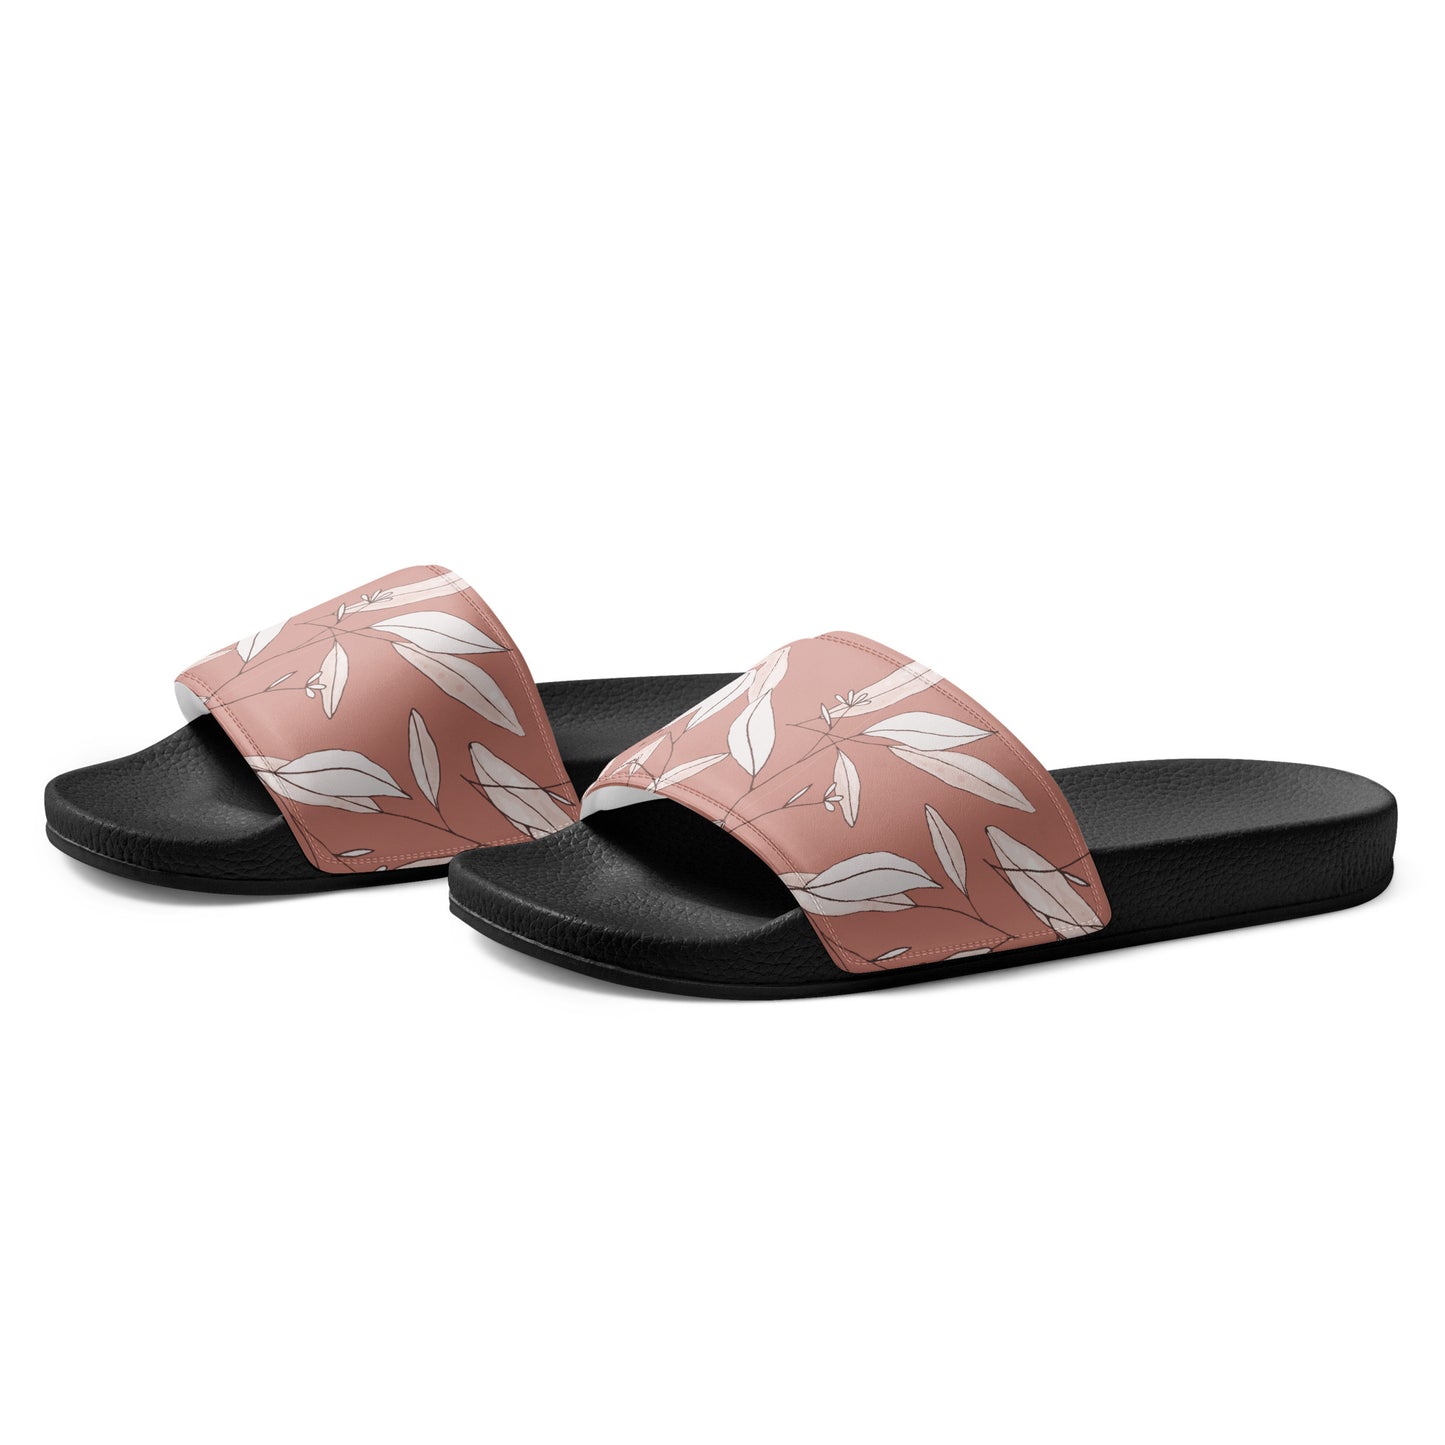 Feathered Finesse Women's Slides